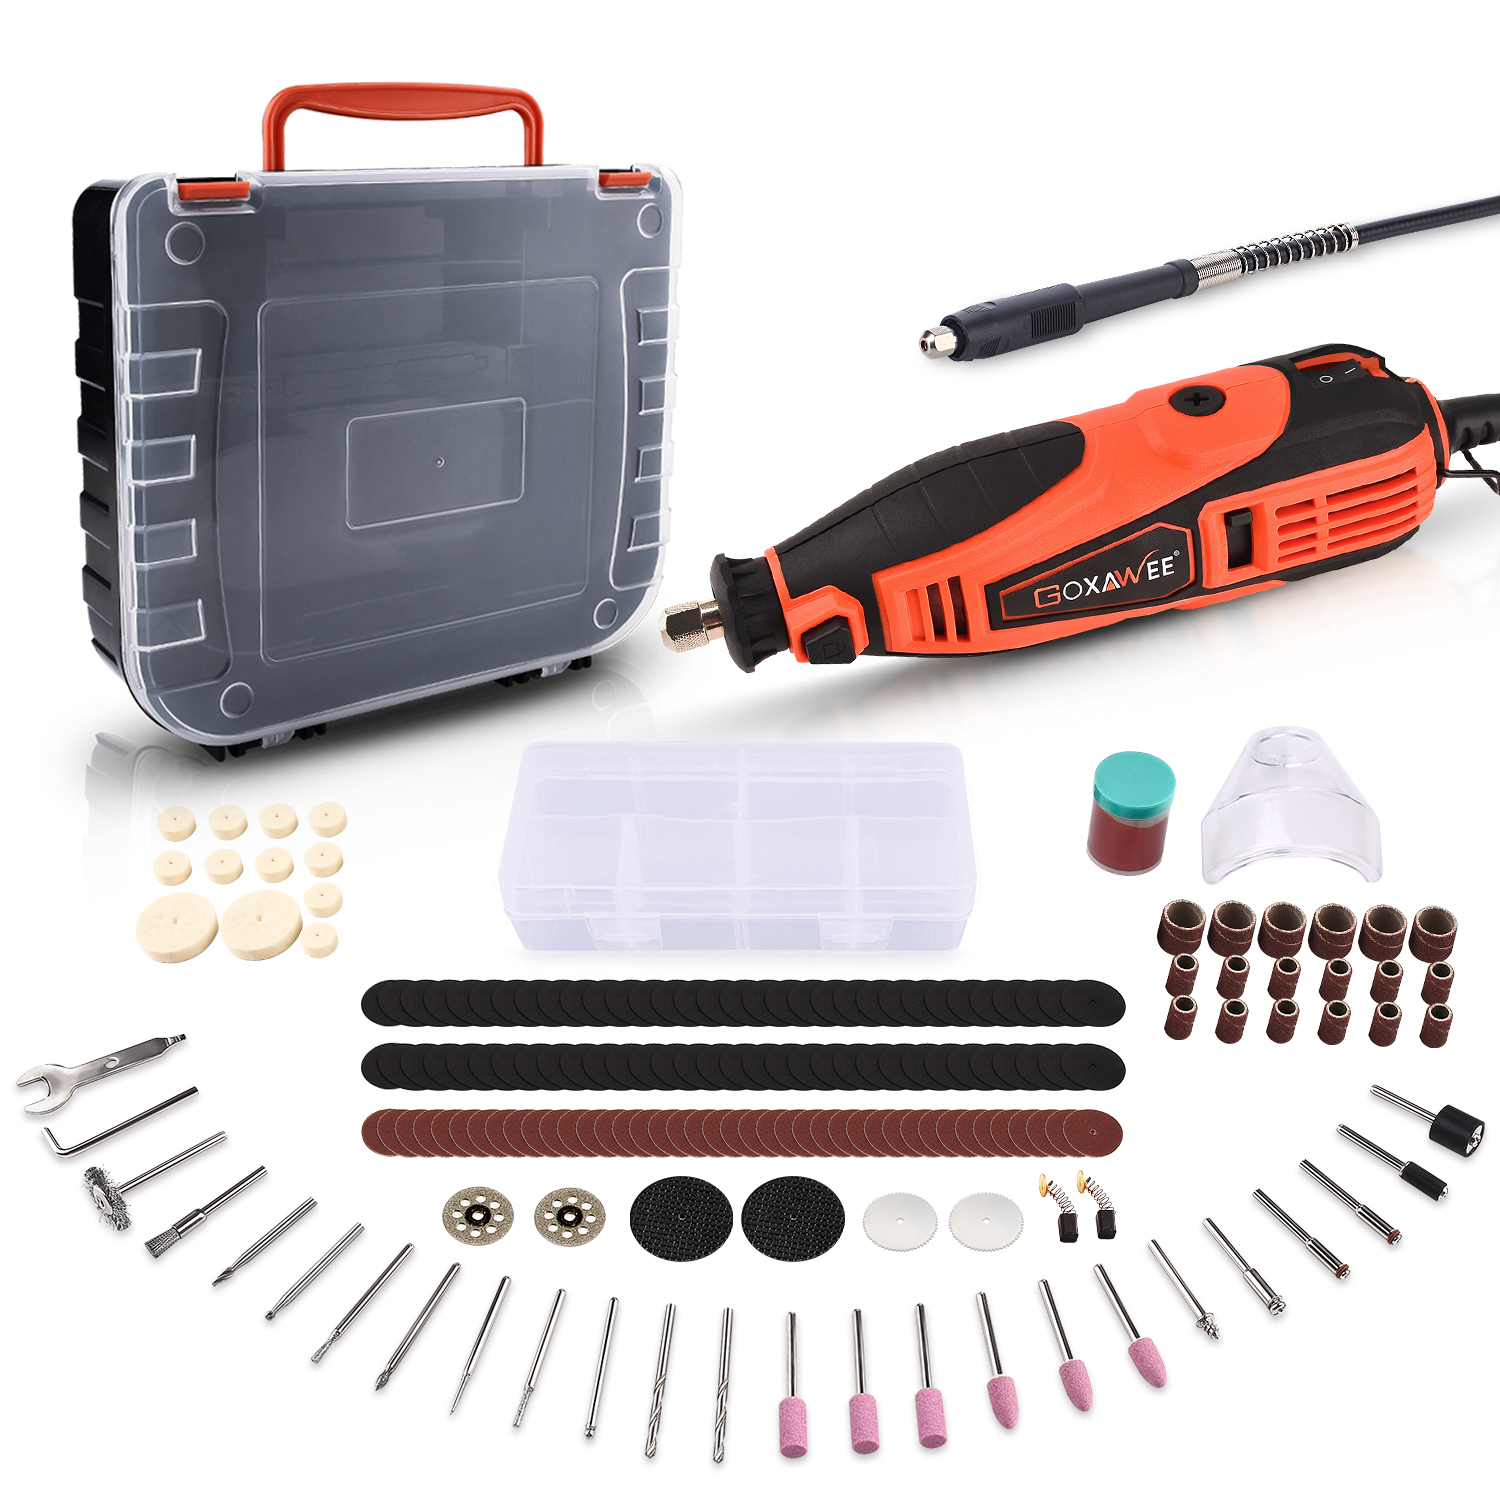 GOXAWEE Rotary Tool Kit with 181 Rotary Tool Accessories & Flex Shaft & Universal Collet,  5 Variable Speed Multi-Tool Electric Mini Drill Set for Crafting DIY Project